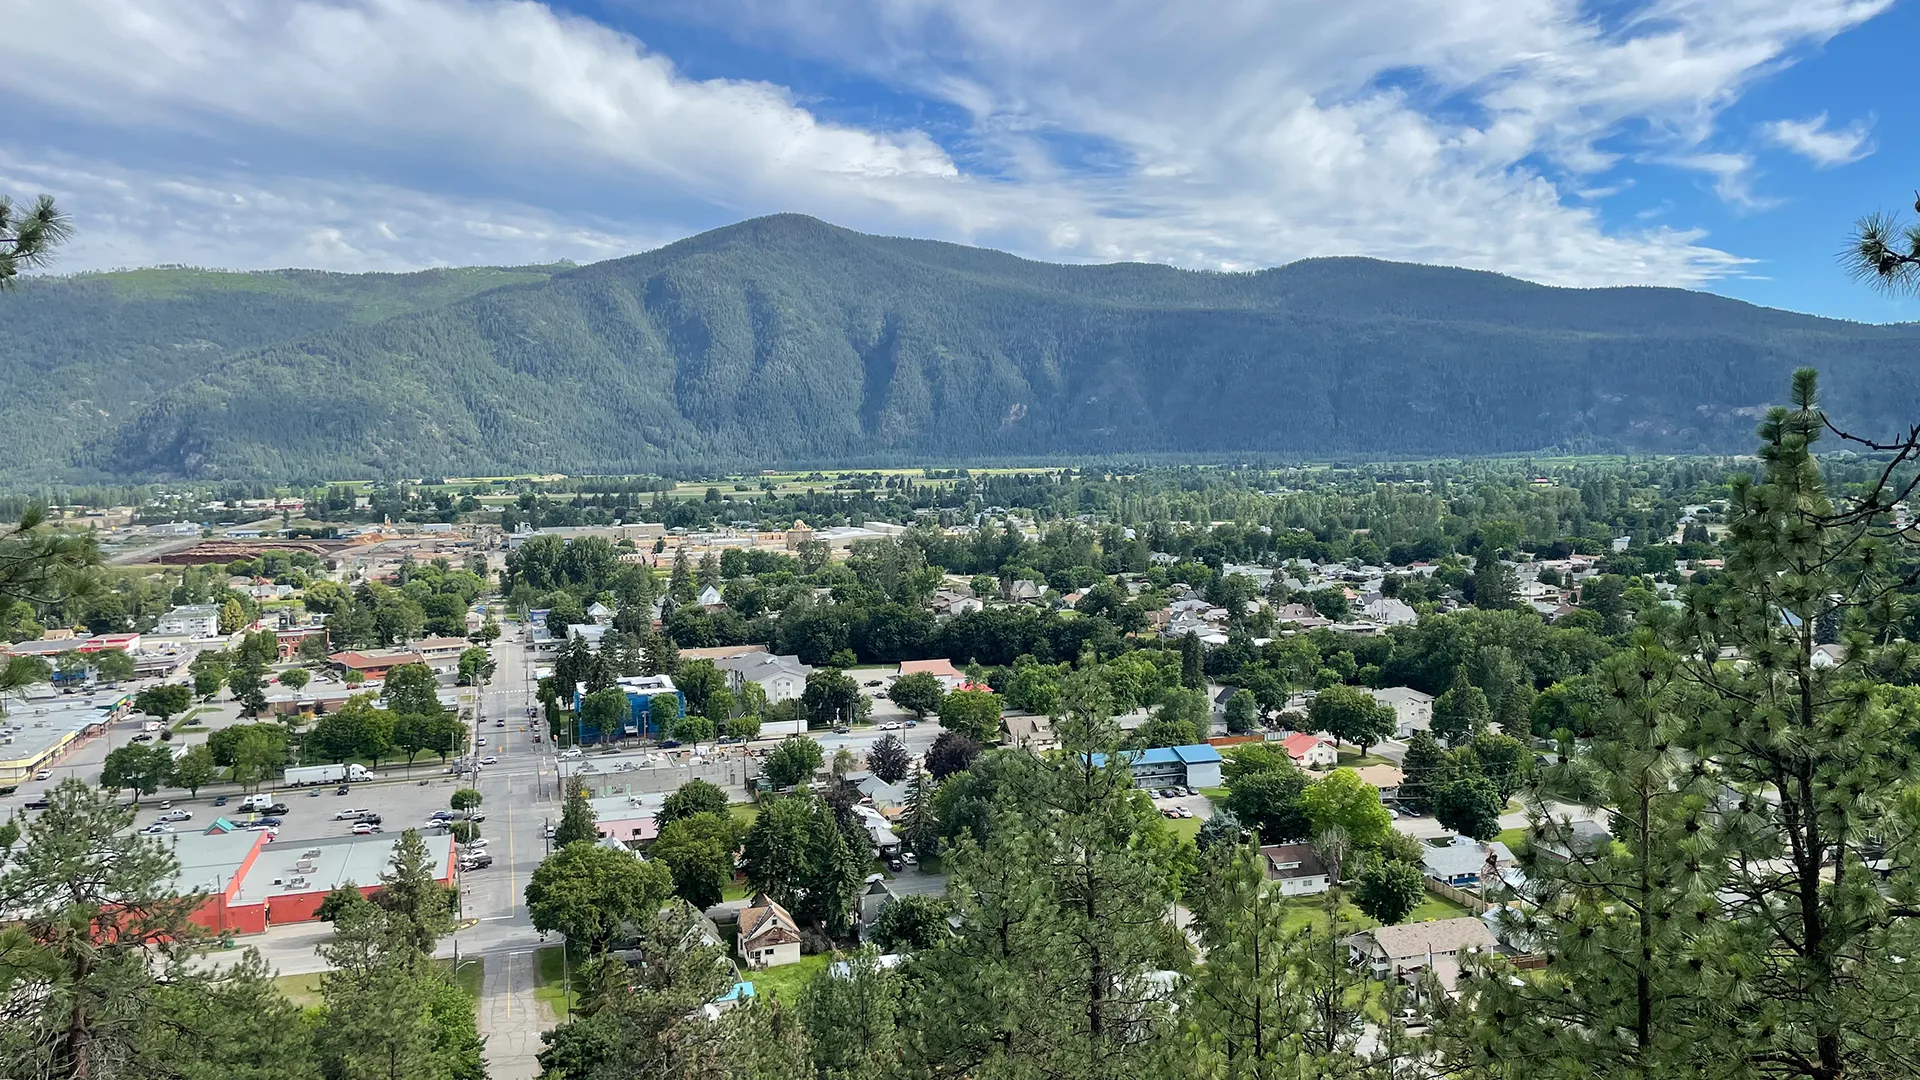 Kootenay Real Estate for Sale - City of Grand Forks